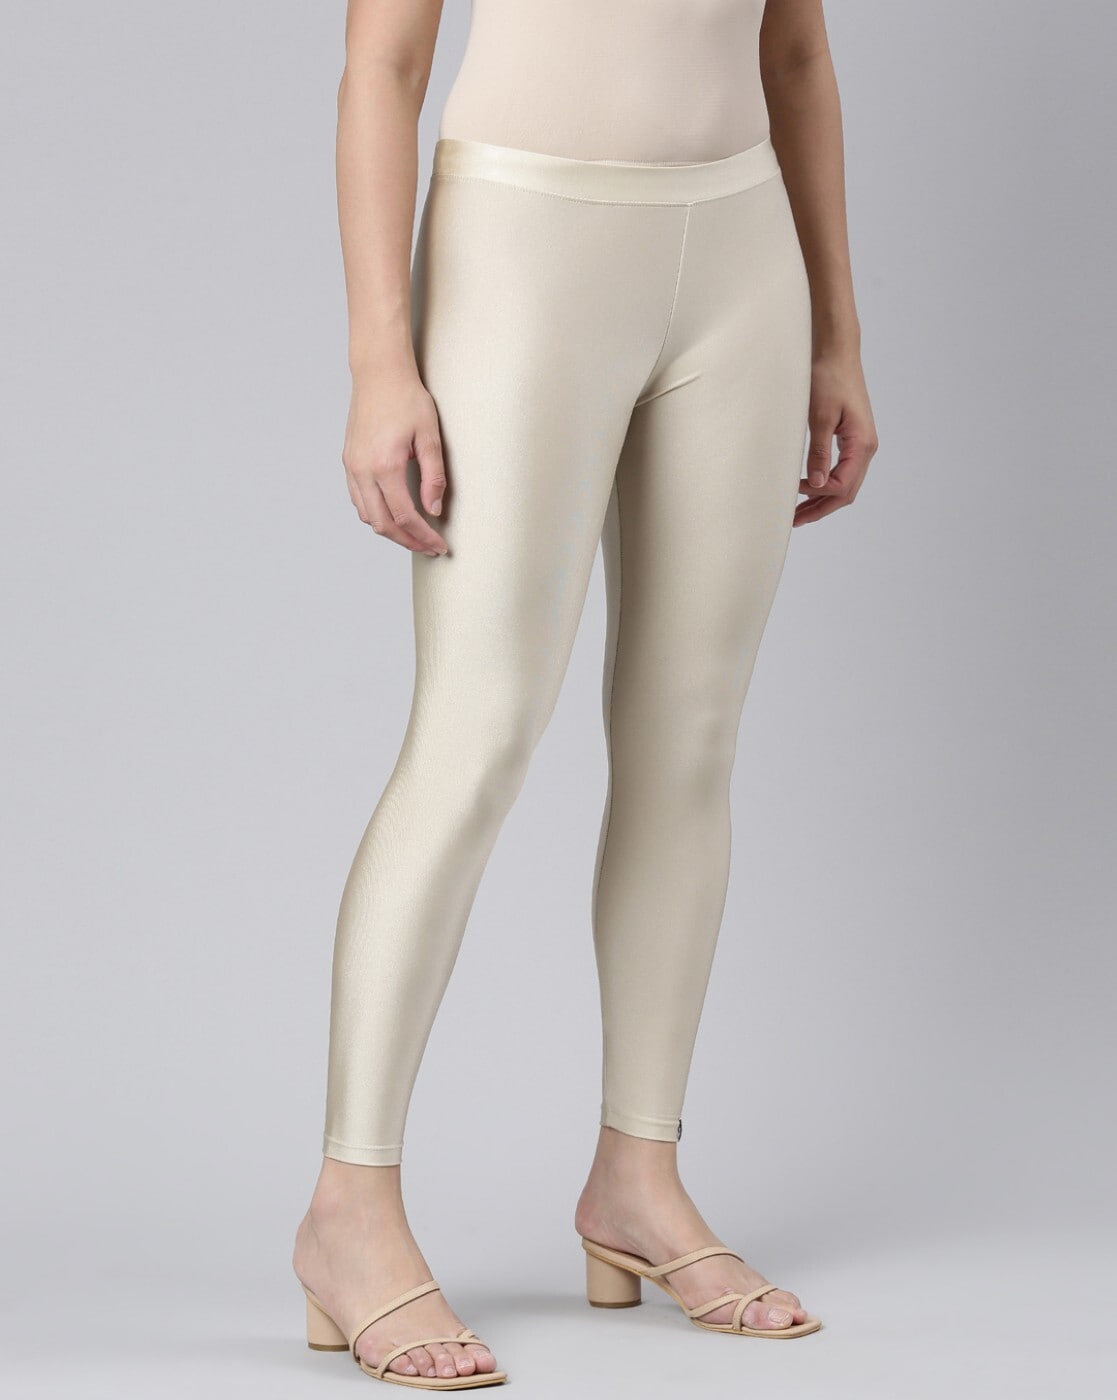 Mid Waist Women's White Zegging - Stylish, Comfy Leggings for Every  Occasion, Casual Wear, Slim Fit at Rs 500 in Ludhiana